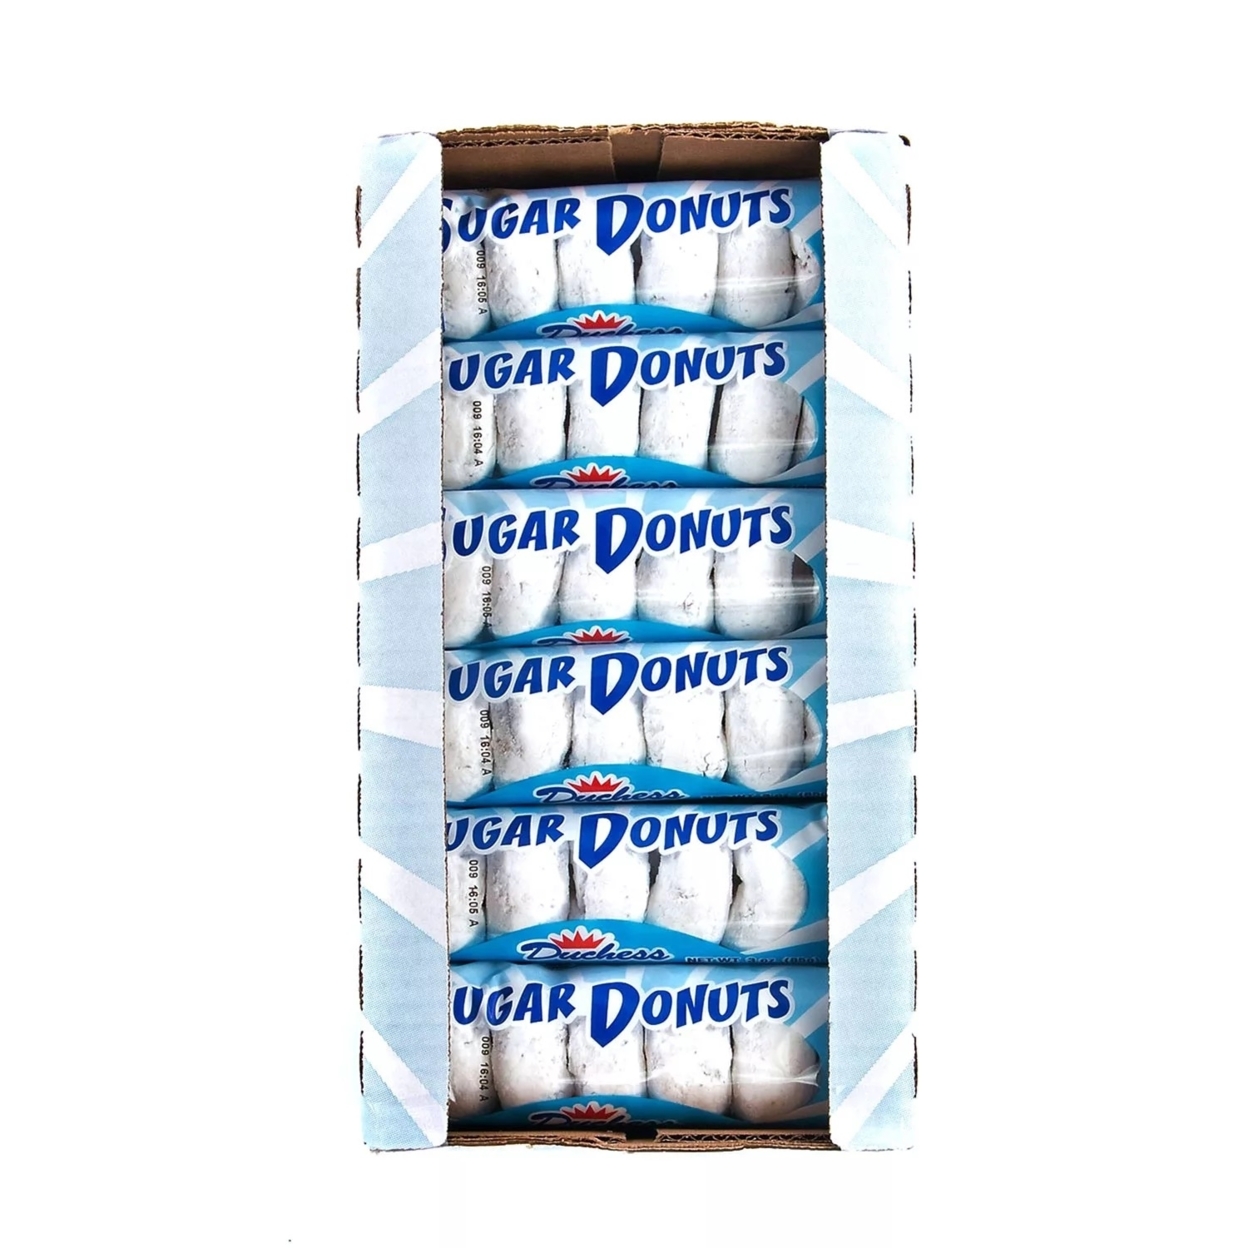 Duchess Sugar Donuts, 3 Ounce (Pack Of 12)